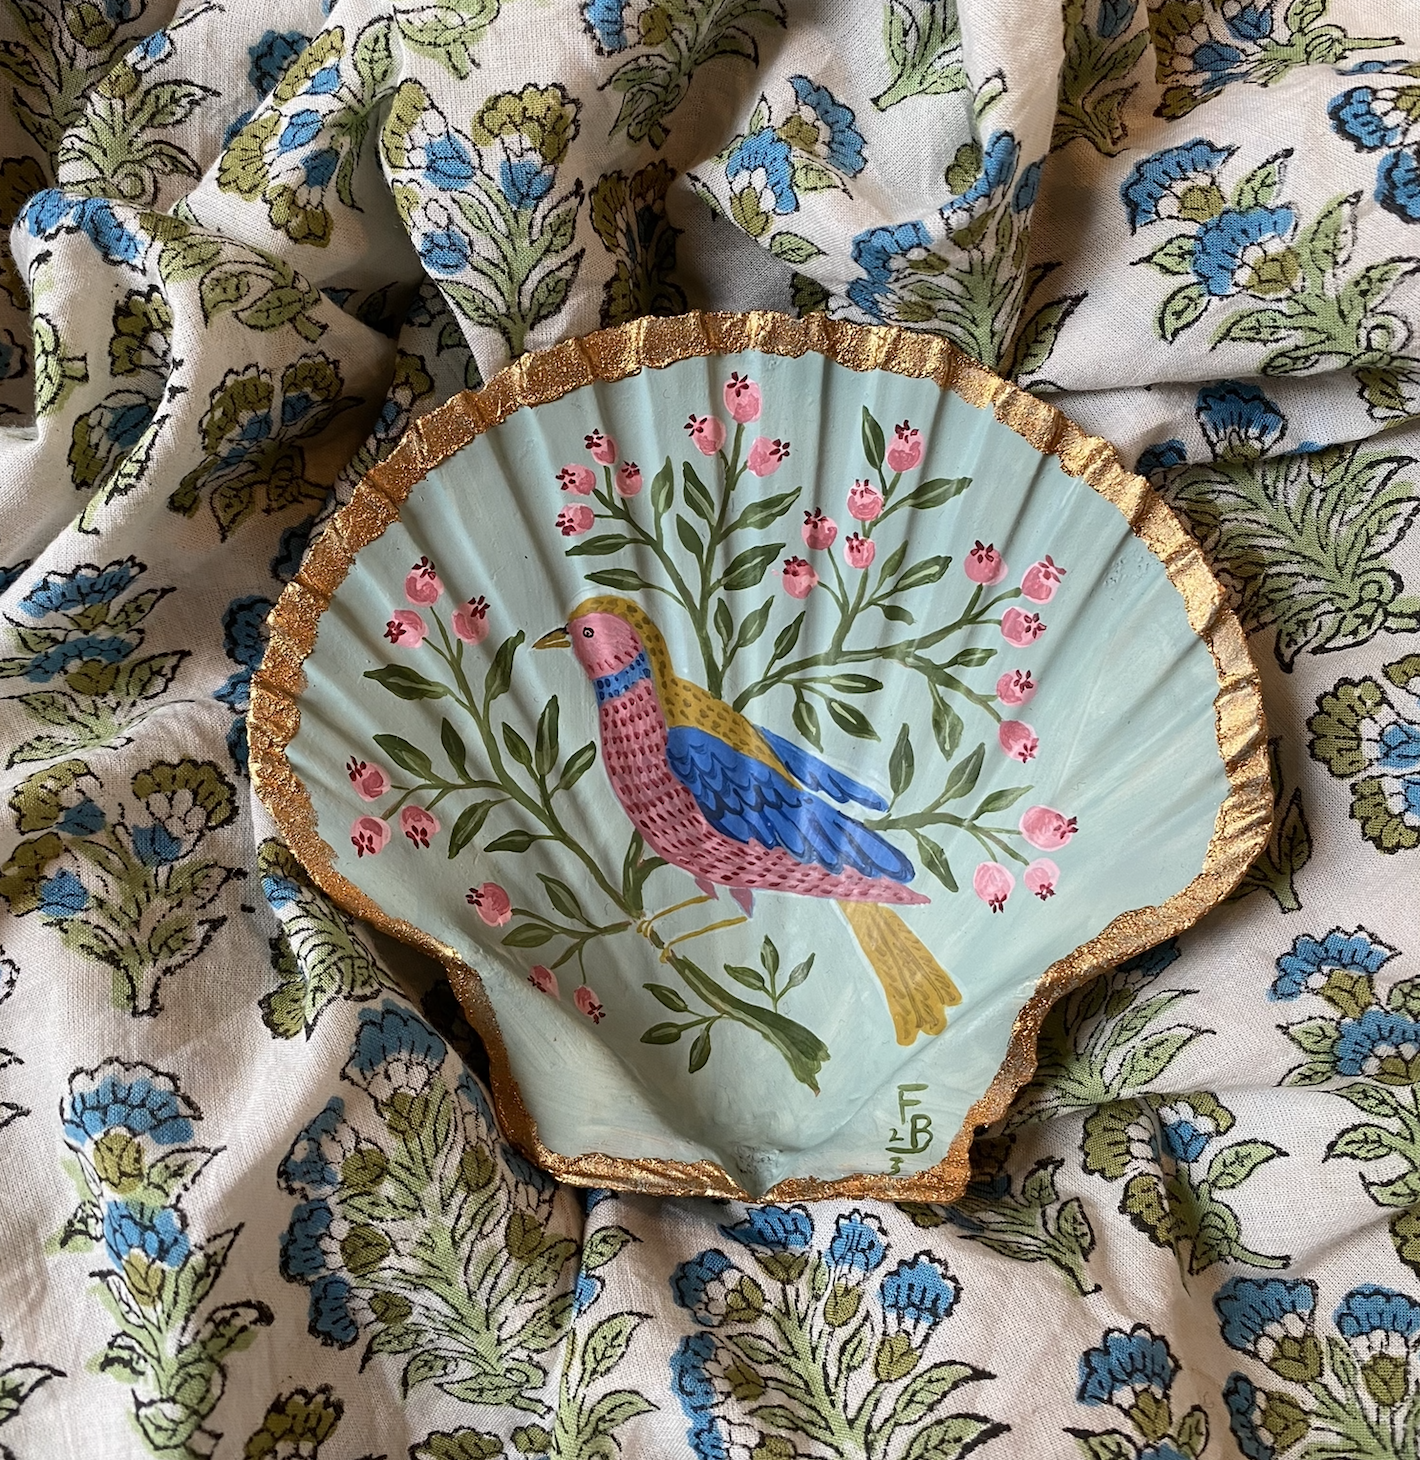 Hand-painted Scallop shell - Bird and berries